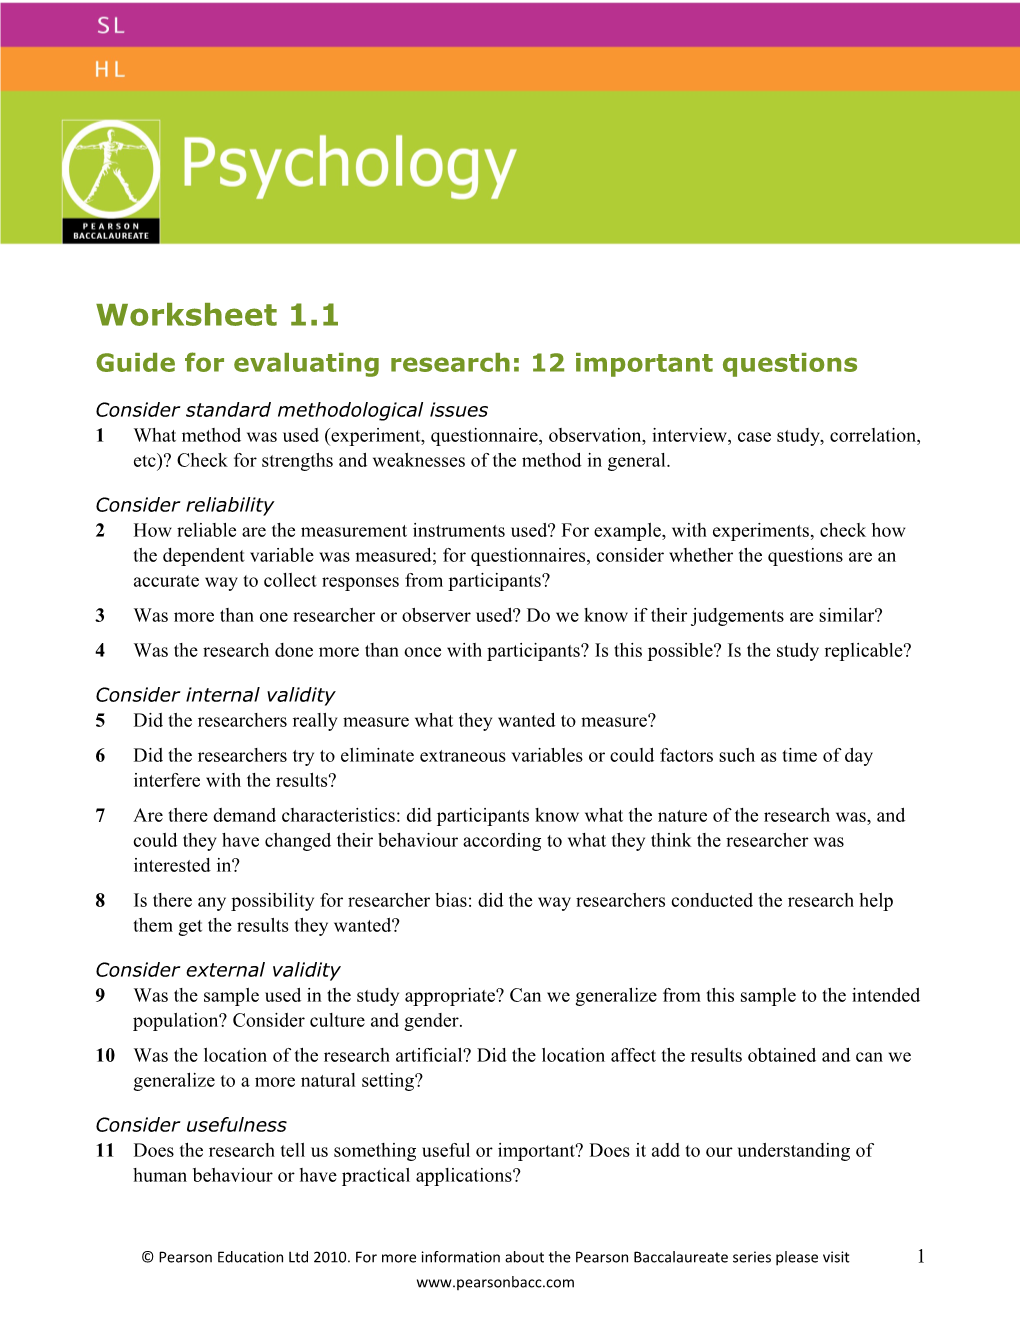 Guide for Evaluating Research: 12 Important Questions